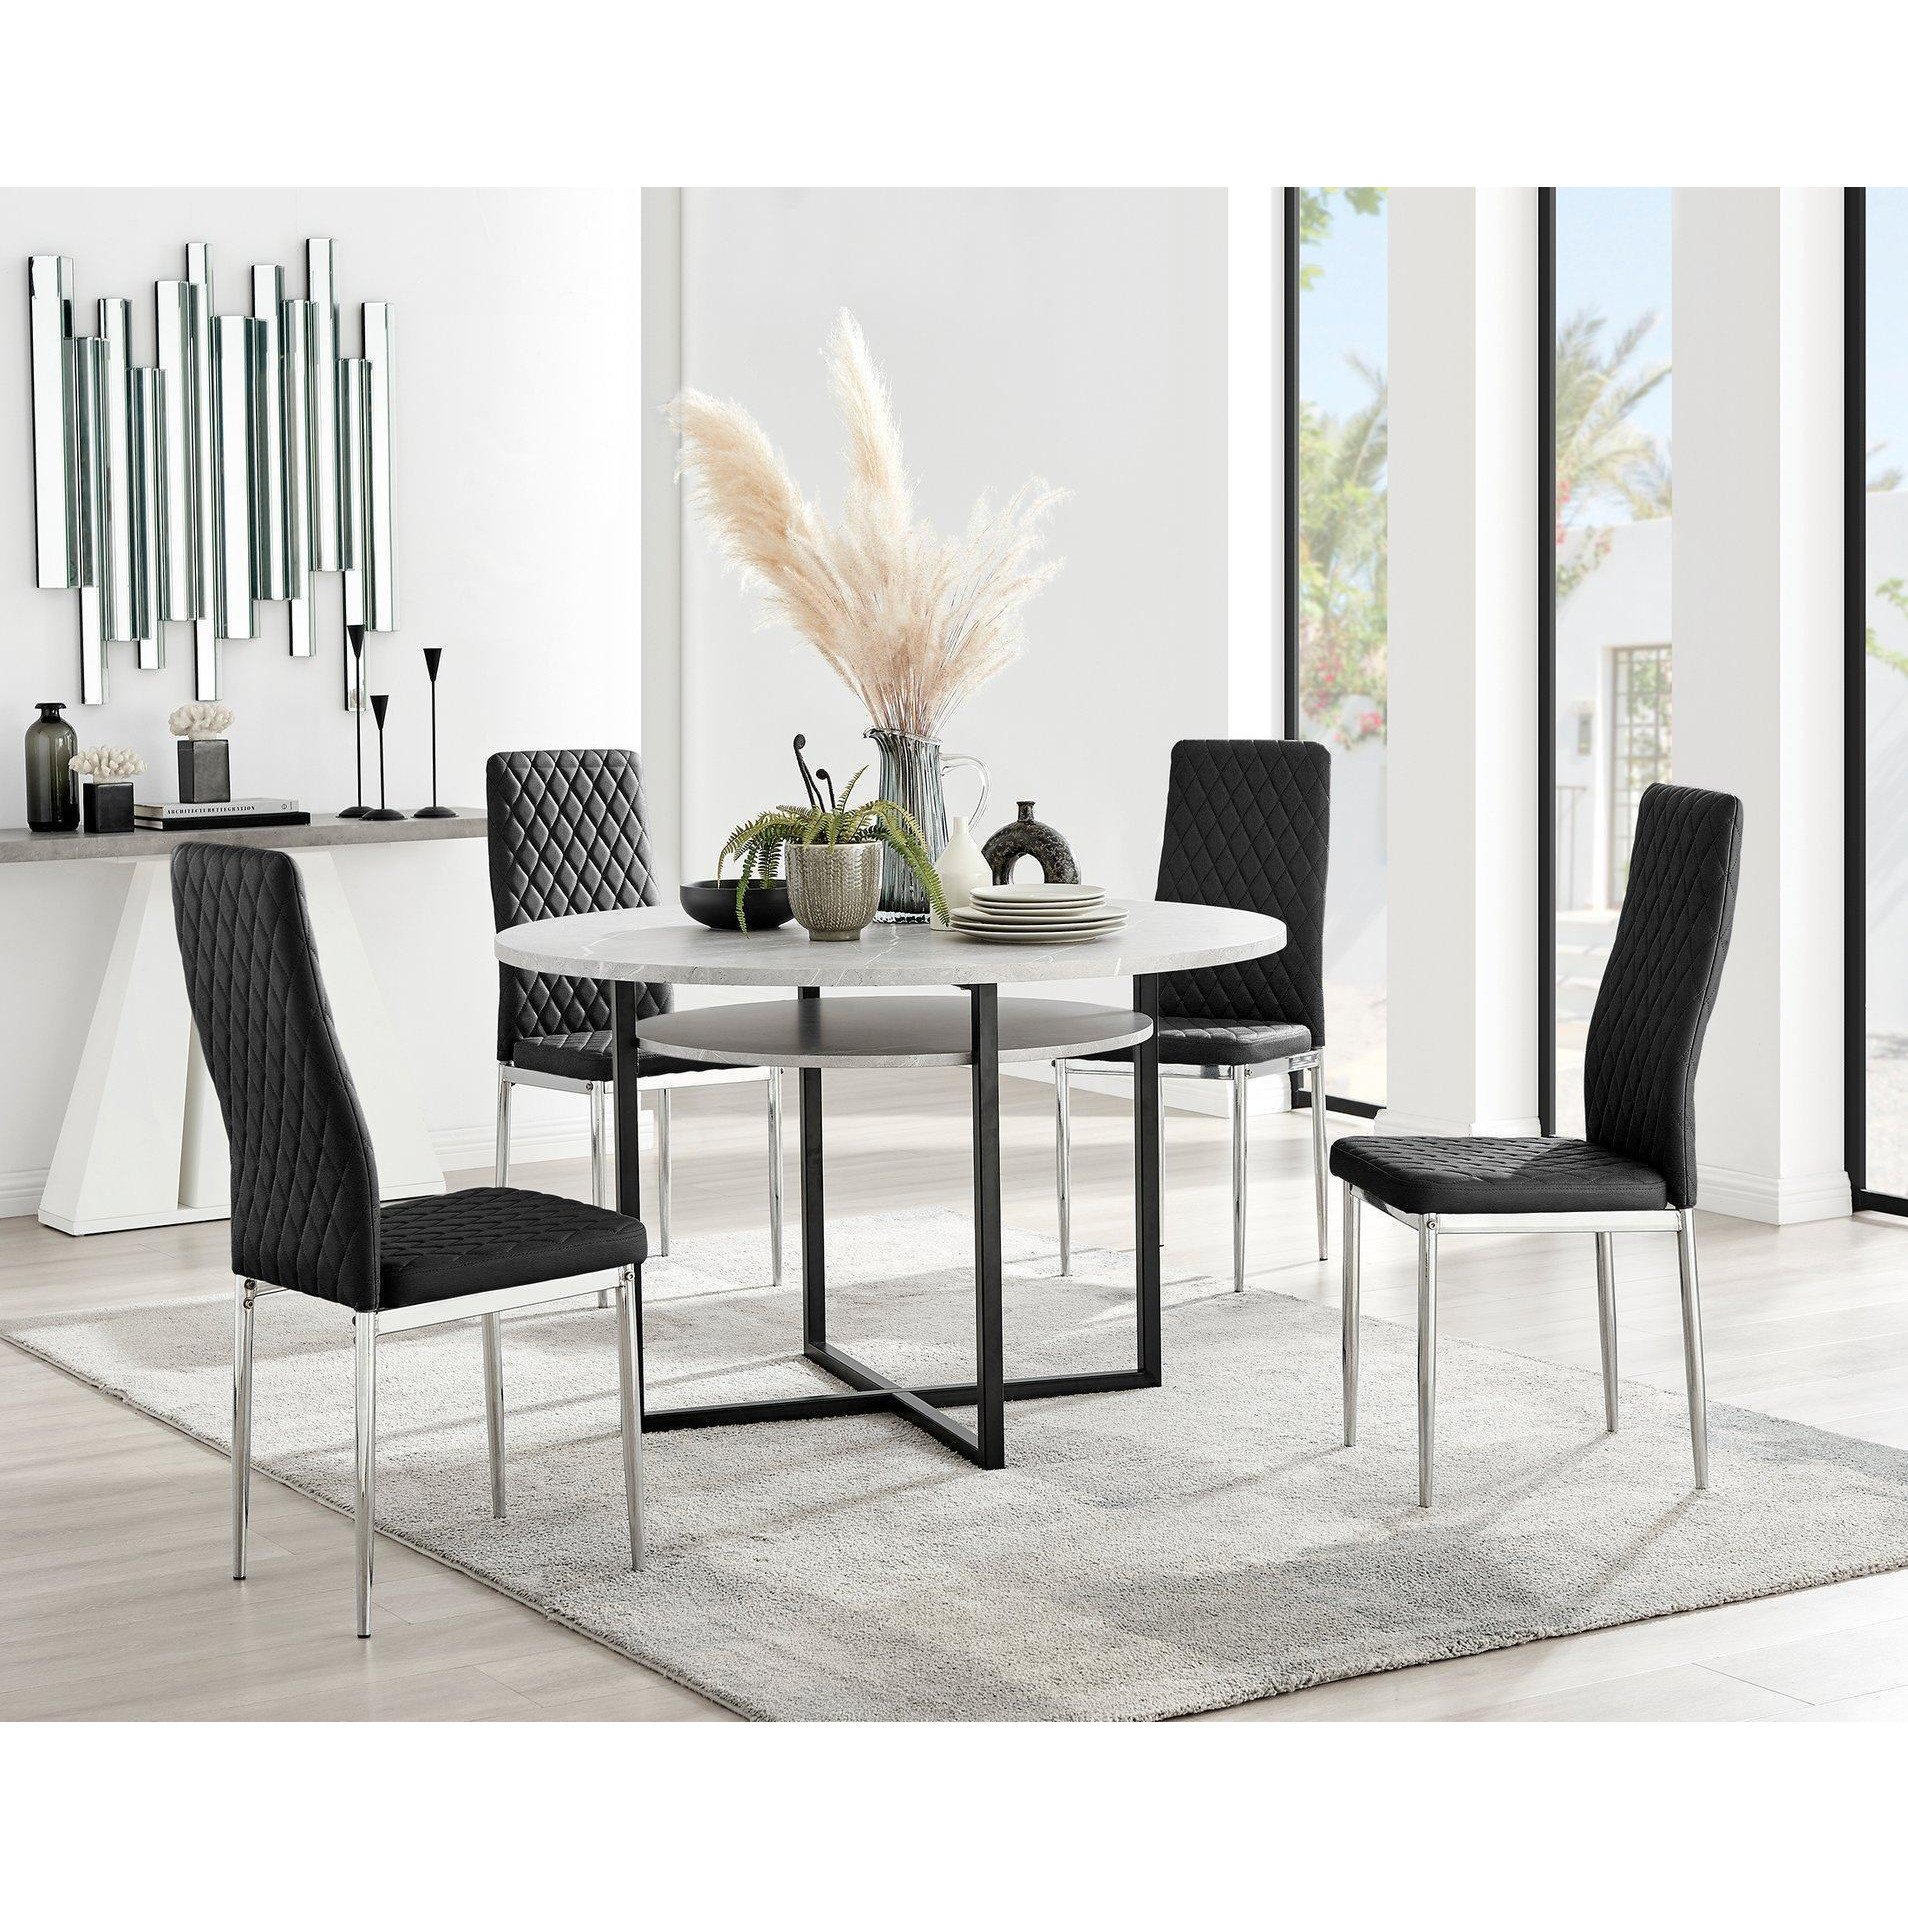 Adley Grey Concrete Effect Round Dining Table & 4 Velvet Milan Chairs - image 1